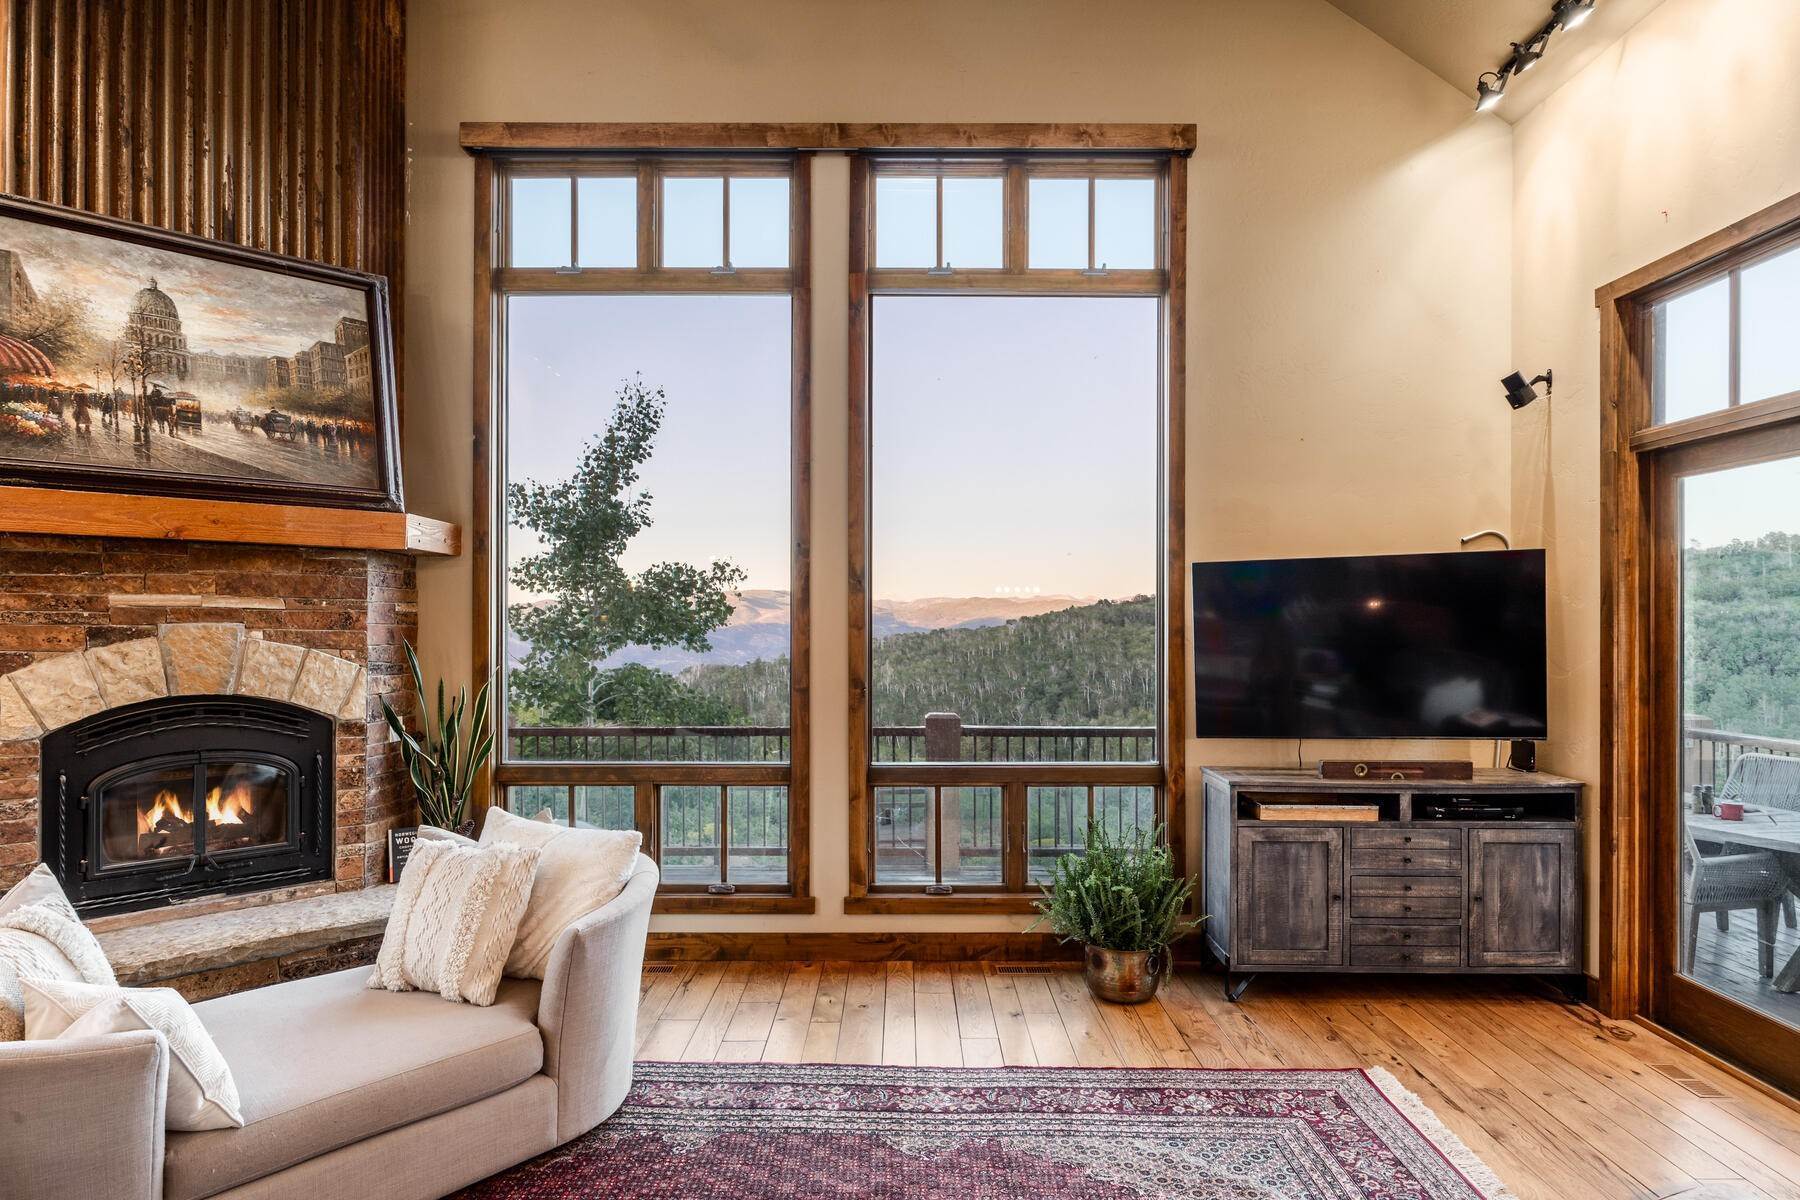 Single Family Homes for Sale at Stunning Mountain Retreat on Acreage in Tollgate Canyon 2463 S Bull Moose Dr Coalville, Utah 84017 United States